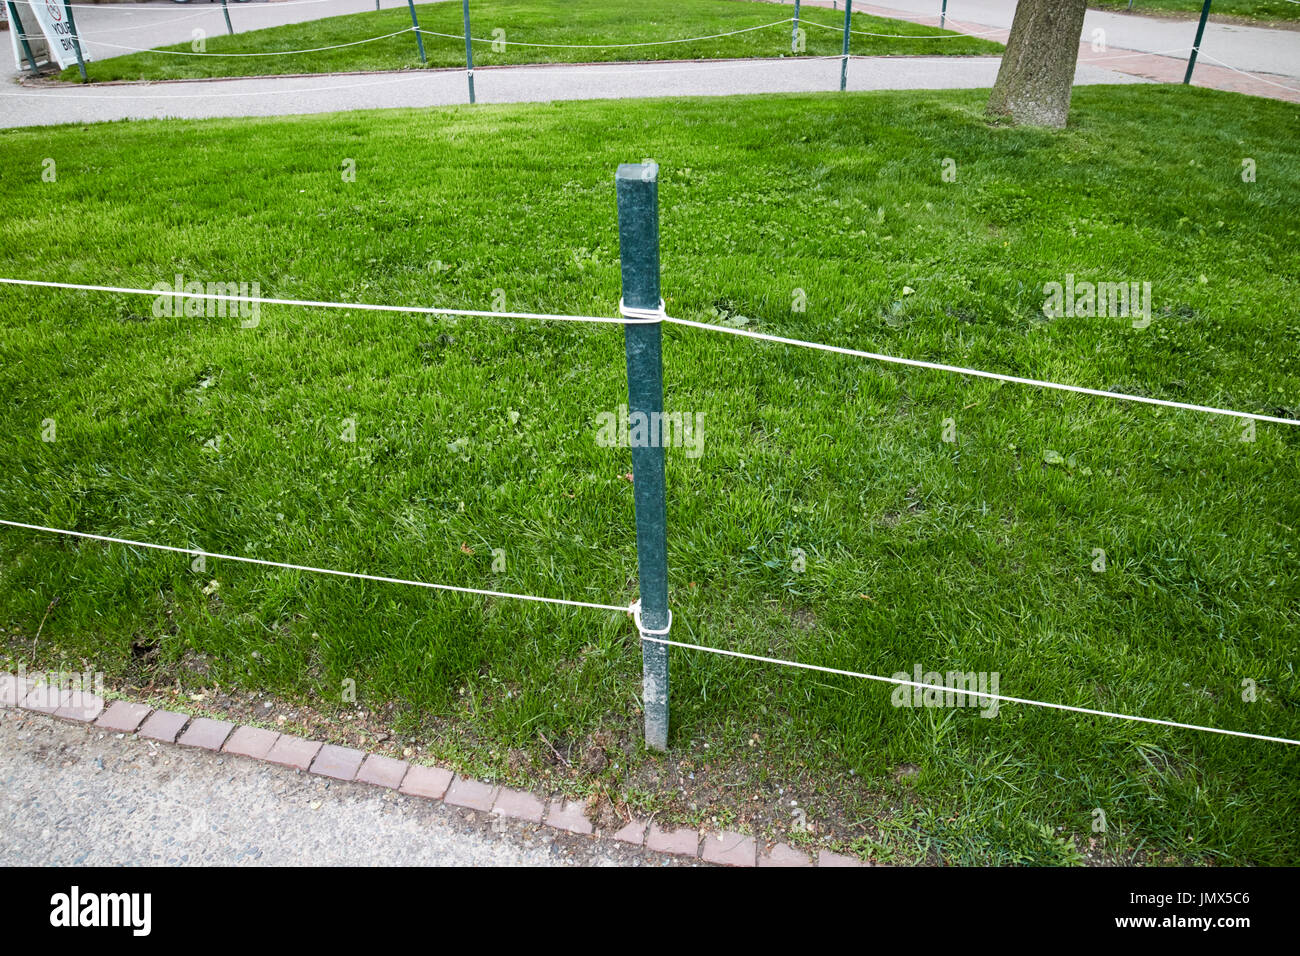 green stage and ropes sectioning off grass to protect it harvard university Boston USA Stock Photo